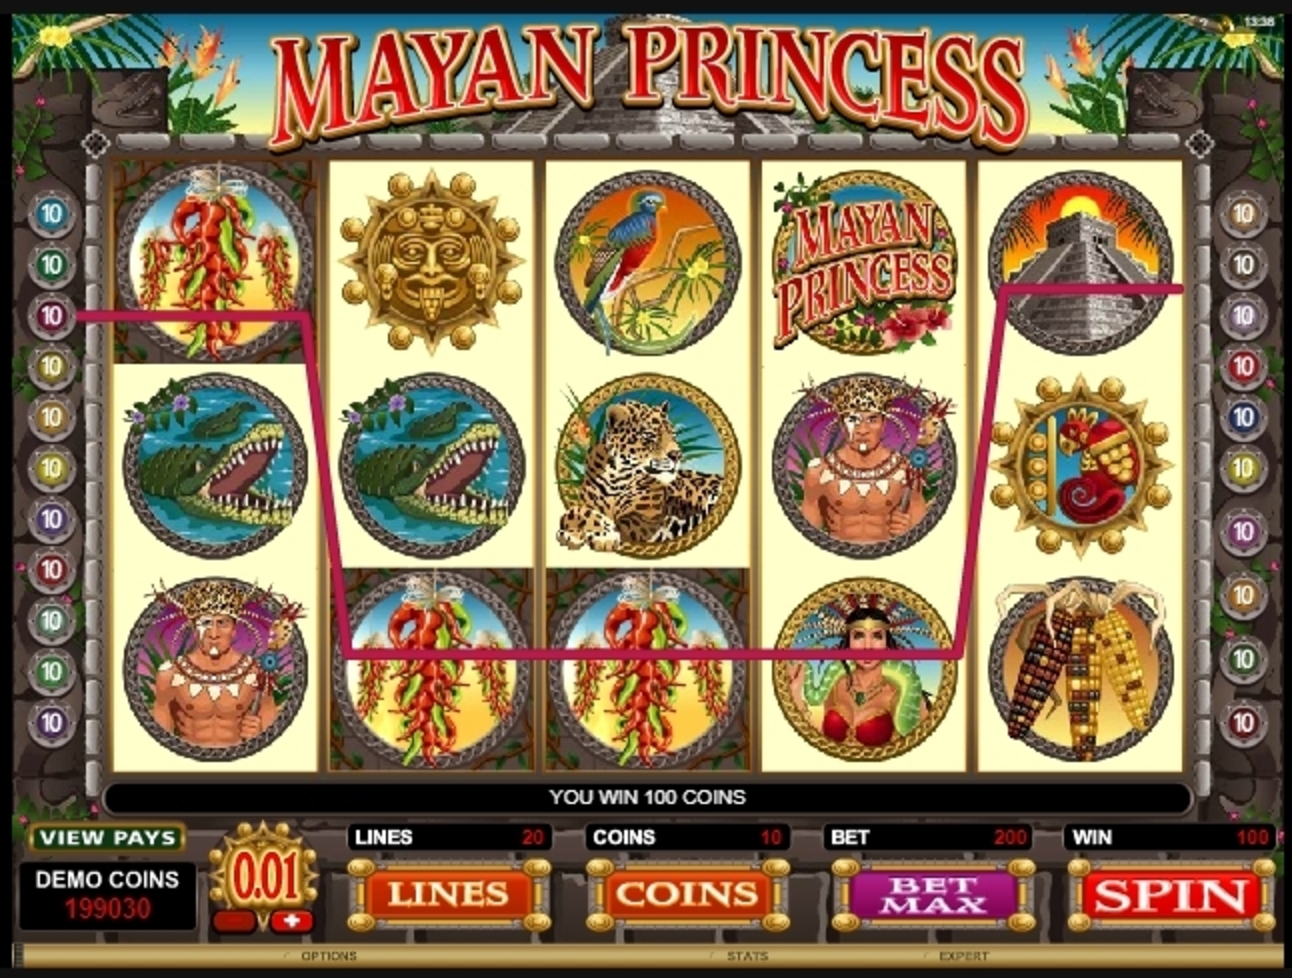 Win Money in Mayan Princess Free Slot Game by Microgaming